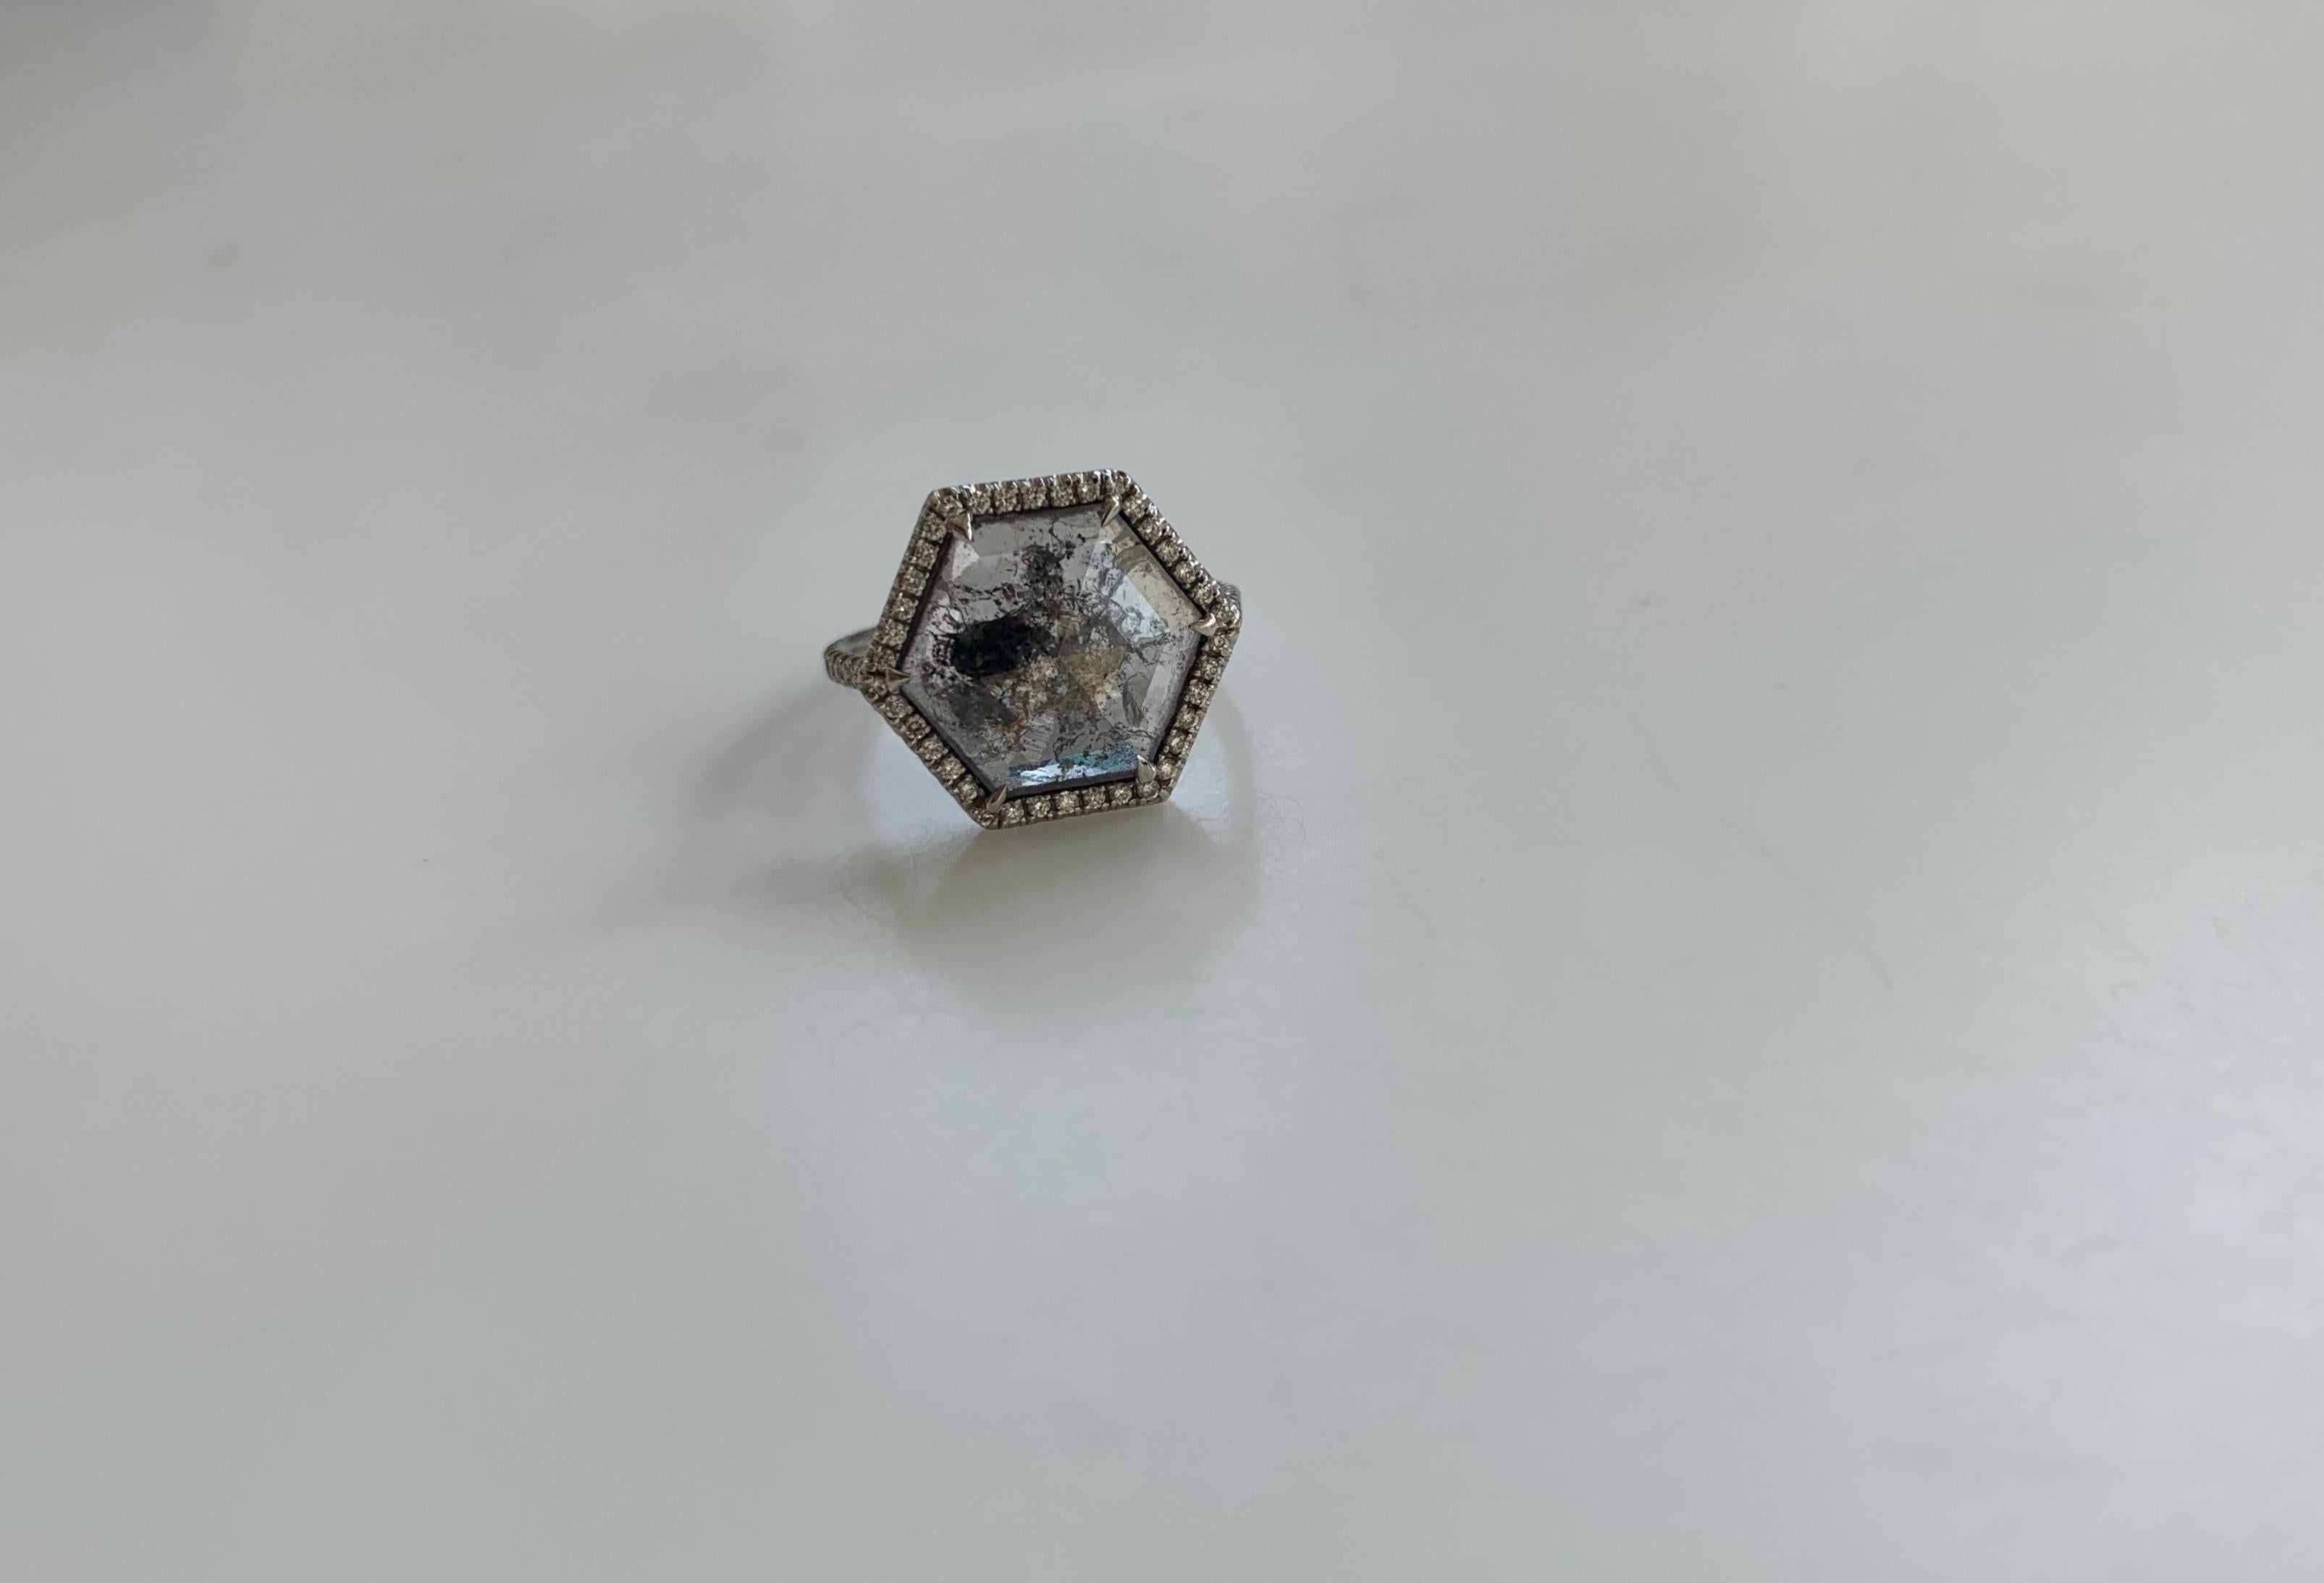 This Ring is 18 Karat White Gold that has been handmade in Los Angeles, CA. The Ring has a 1.85 Carat center Diamond with 0.27 Carats White Diamond pave. This Ring is one of a kind and is a size 2.75